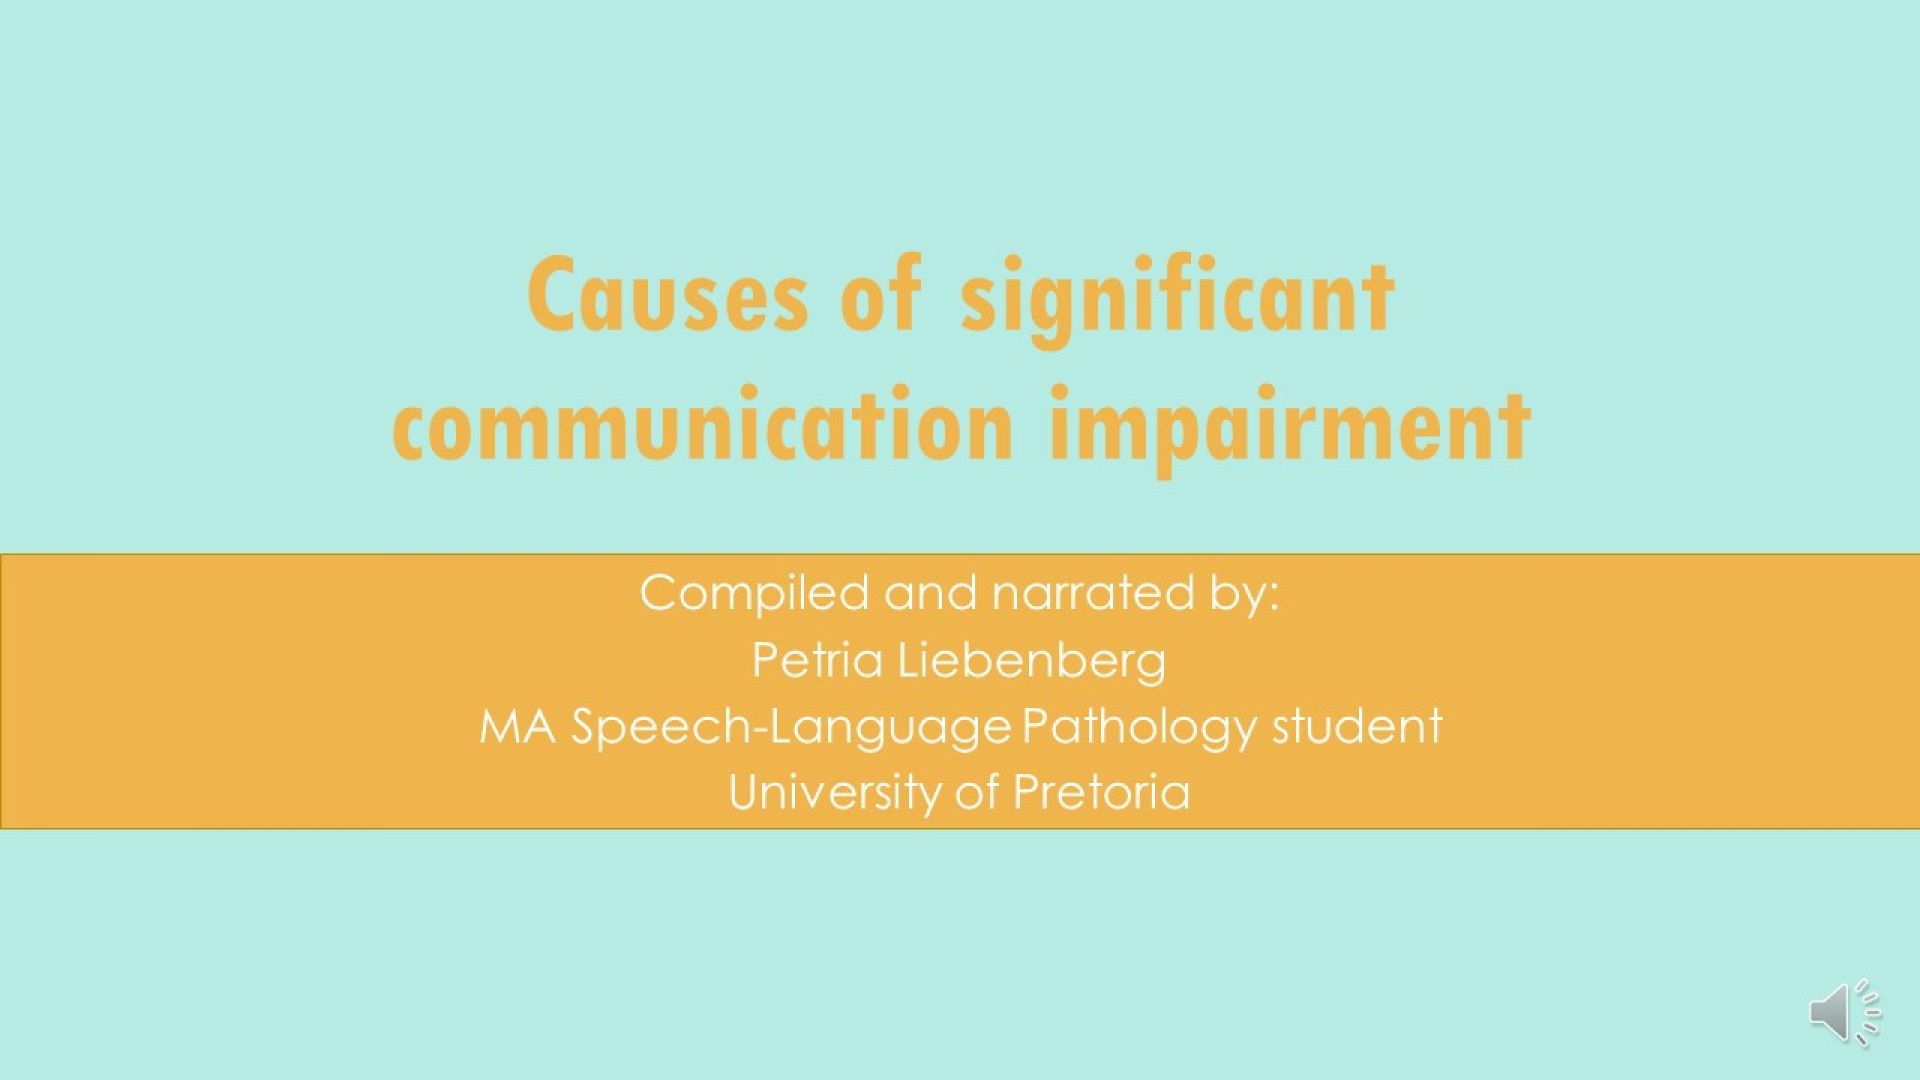 11/23 - Causes of significant communication impairment